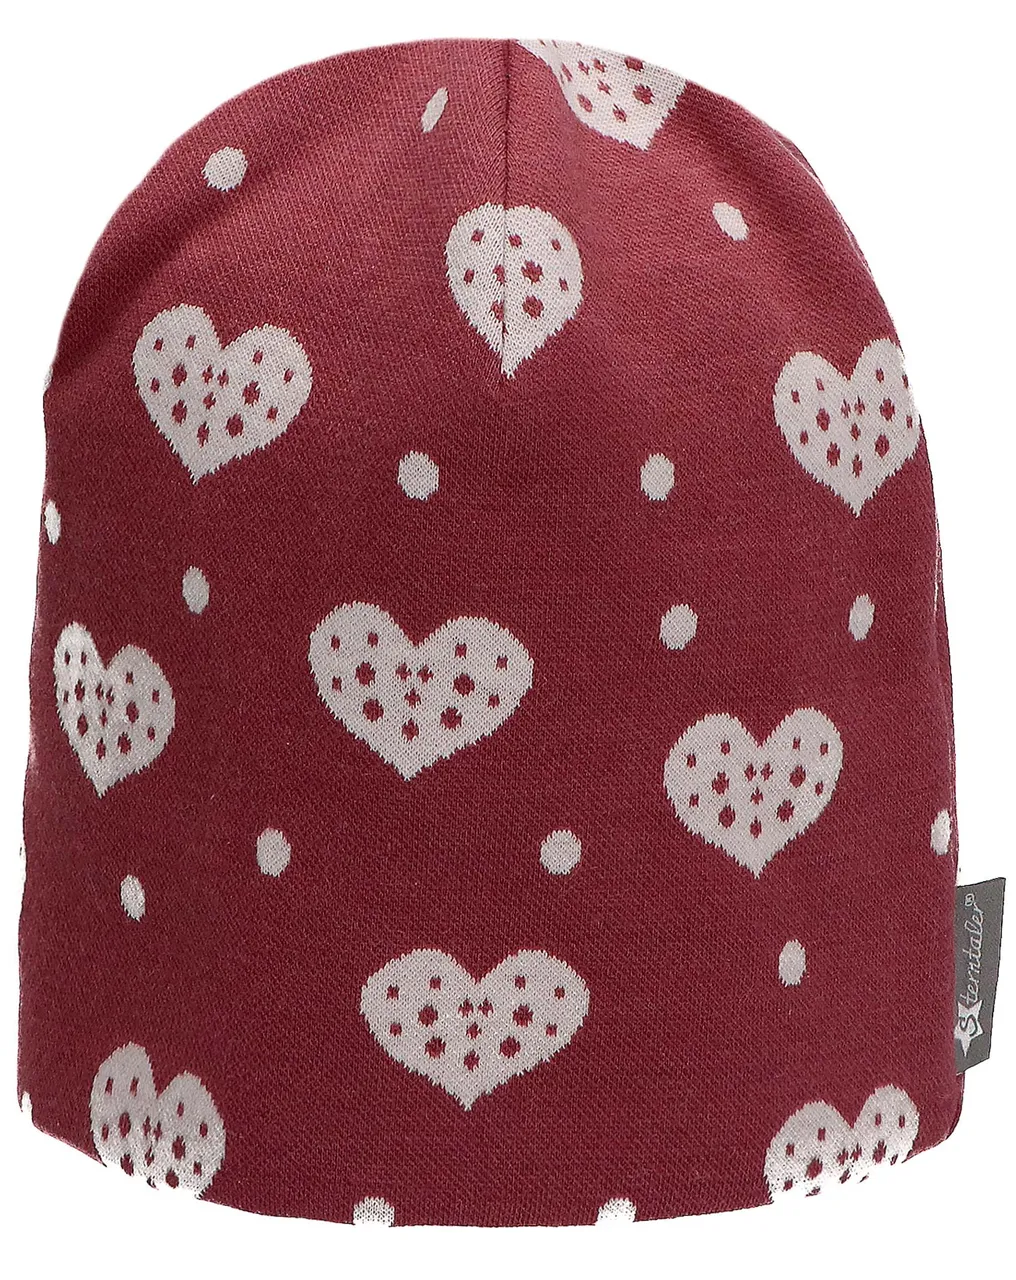 Beanie SLOUCH HEARTS in pink